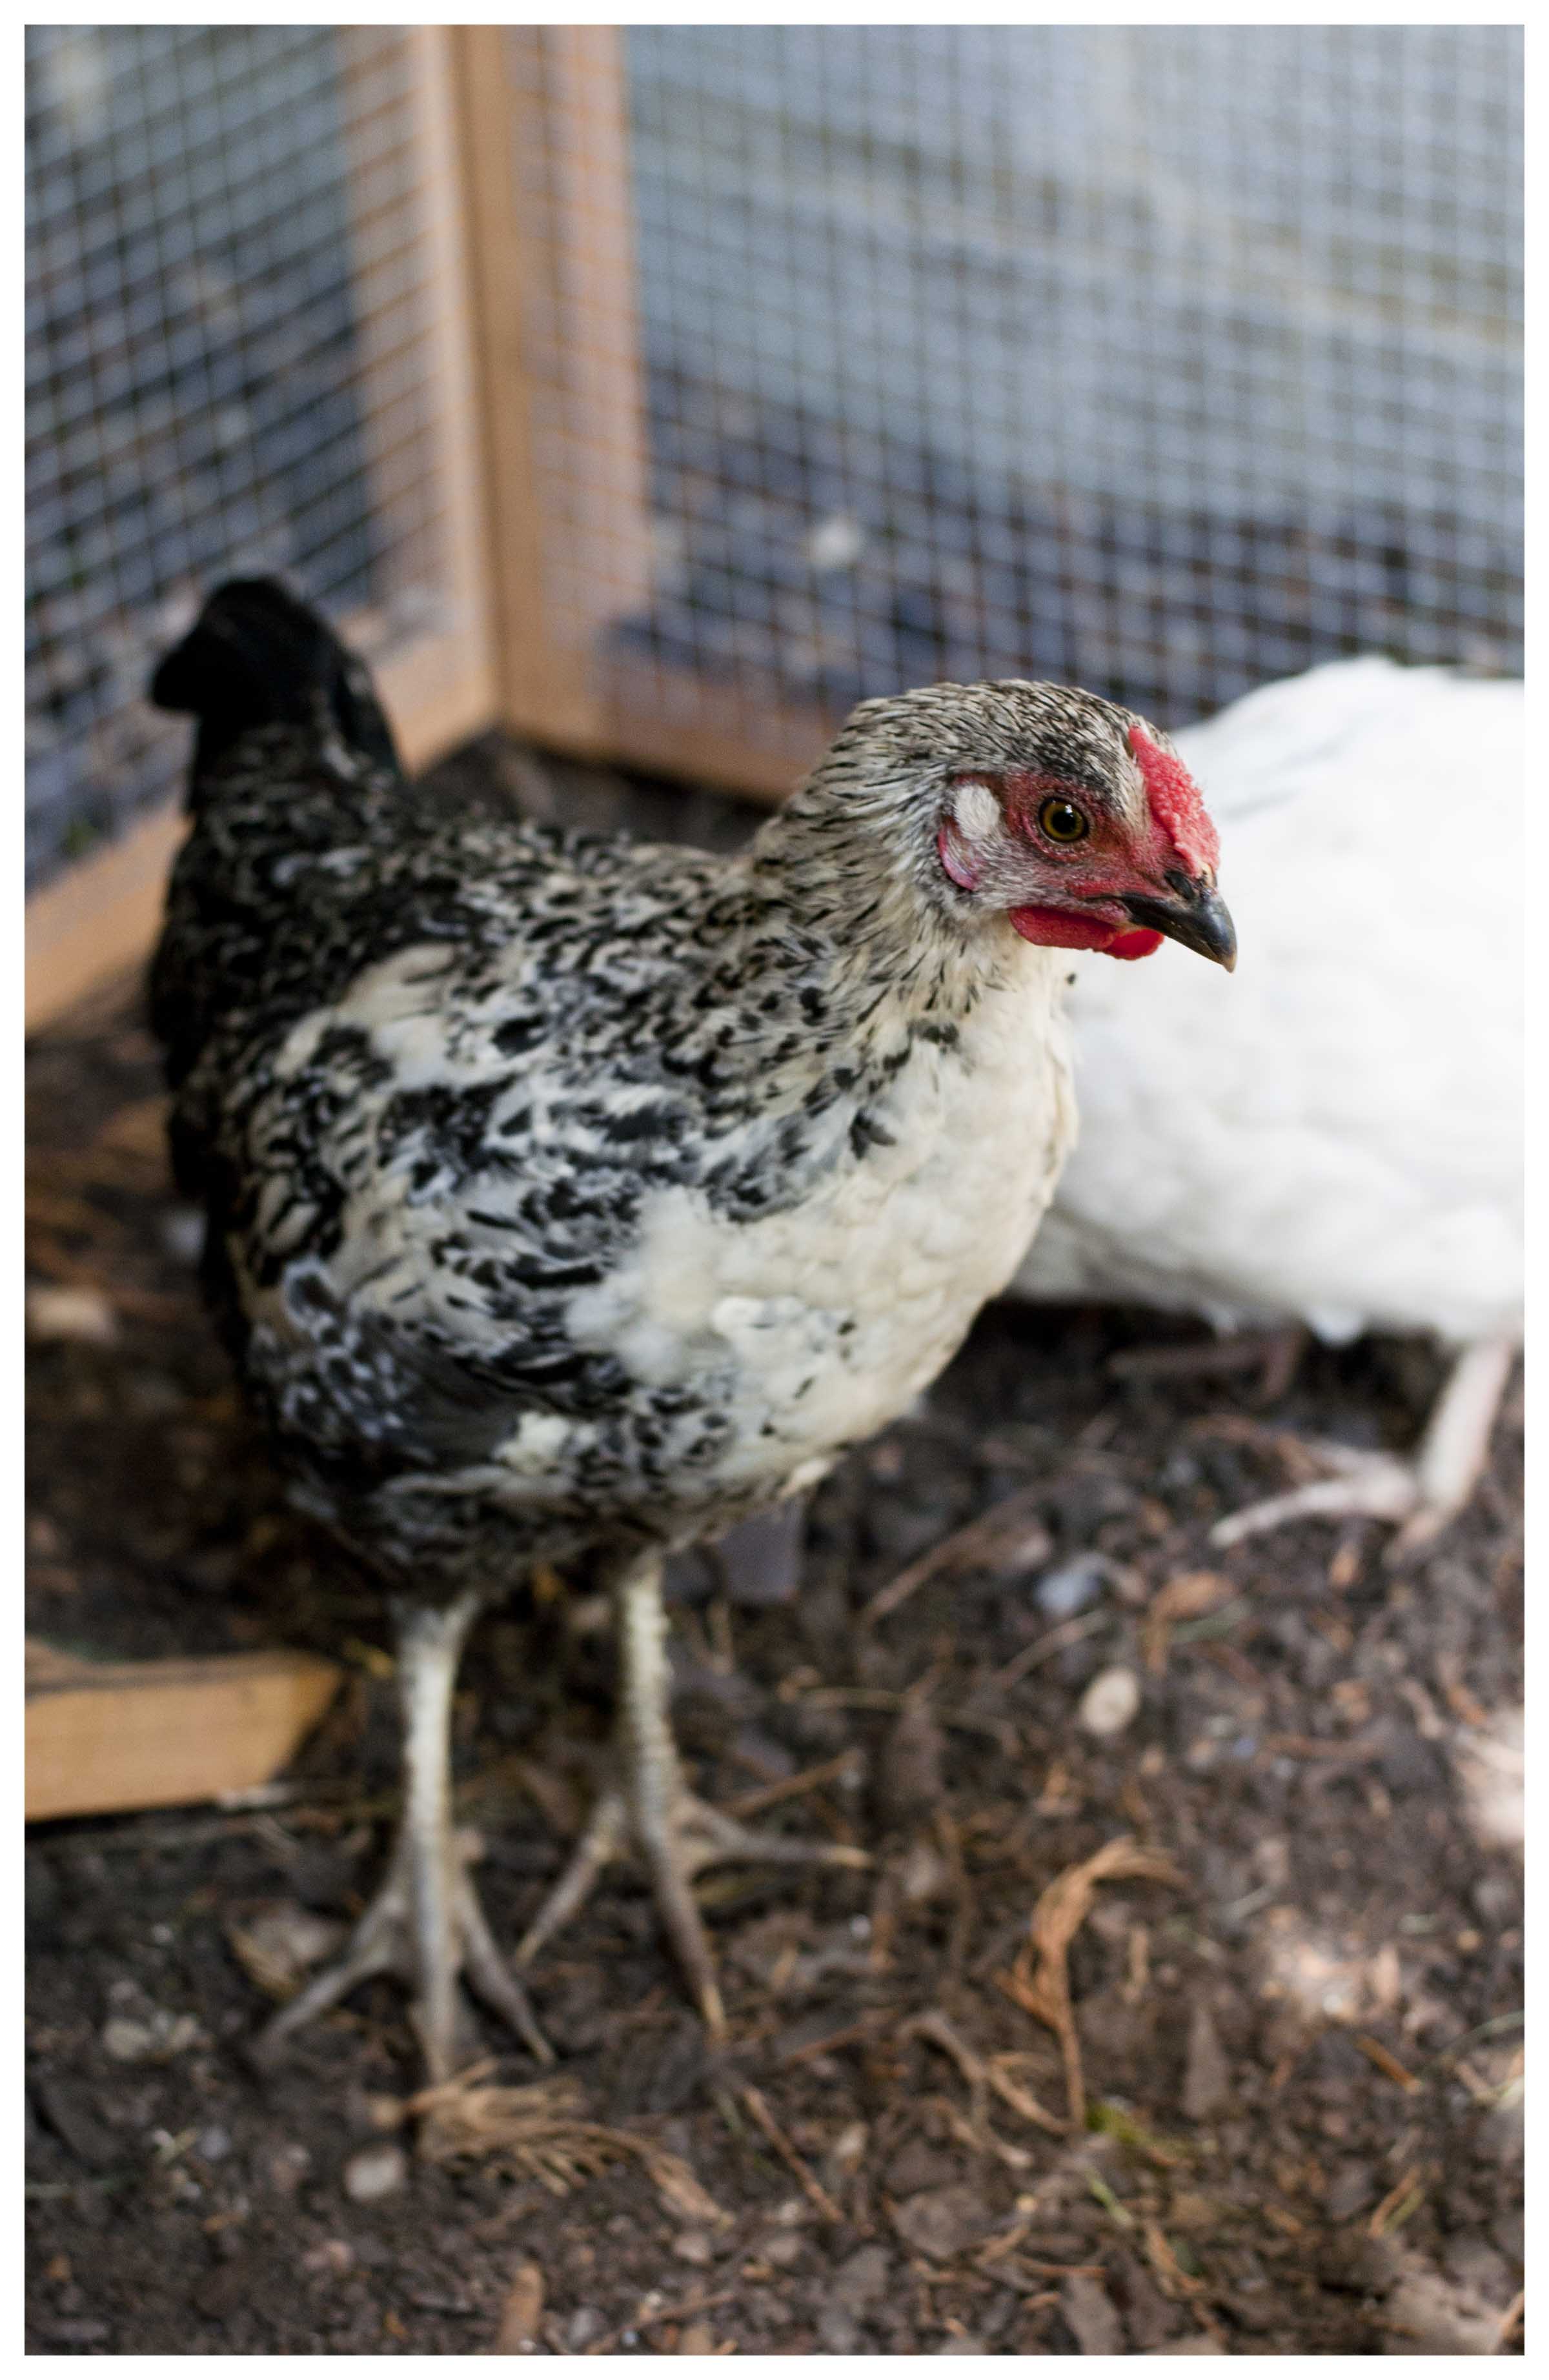 queenieforweb.jpg

I know it's not an ideal photo, but does anyone have any idea of the breed and/or sex of this chicken?
I'm new to all this so forgive my ignorance!
Deborah